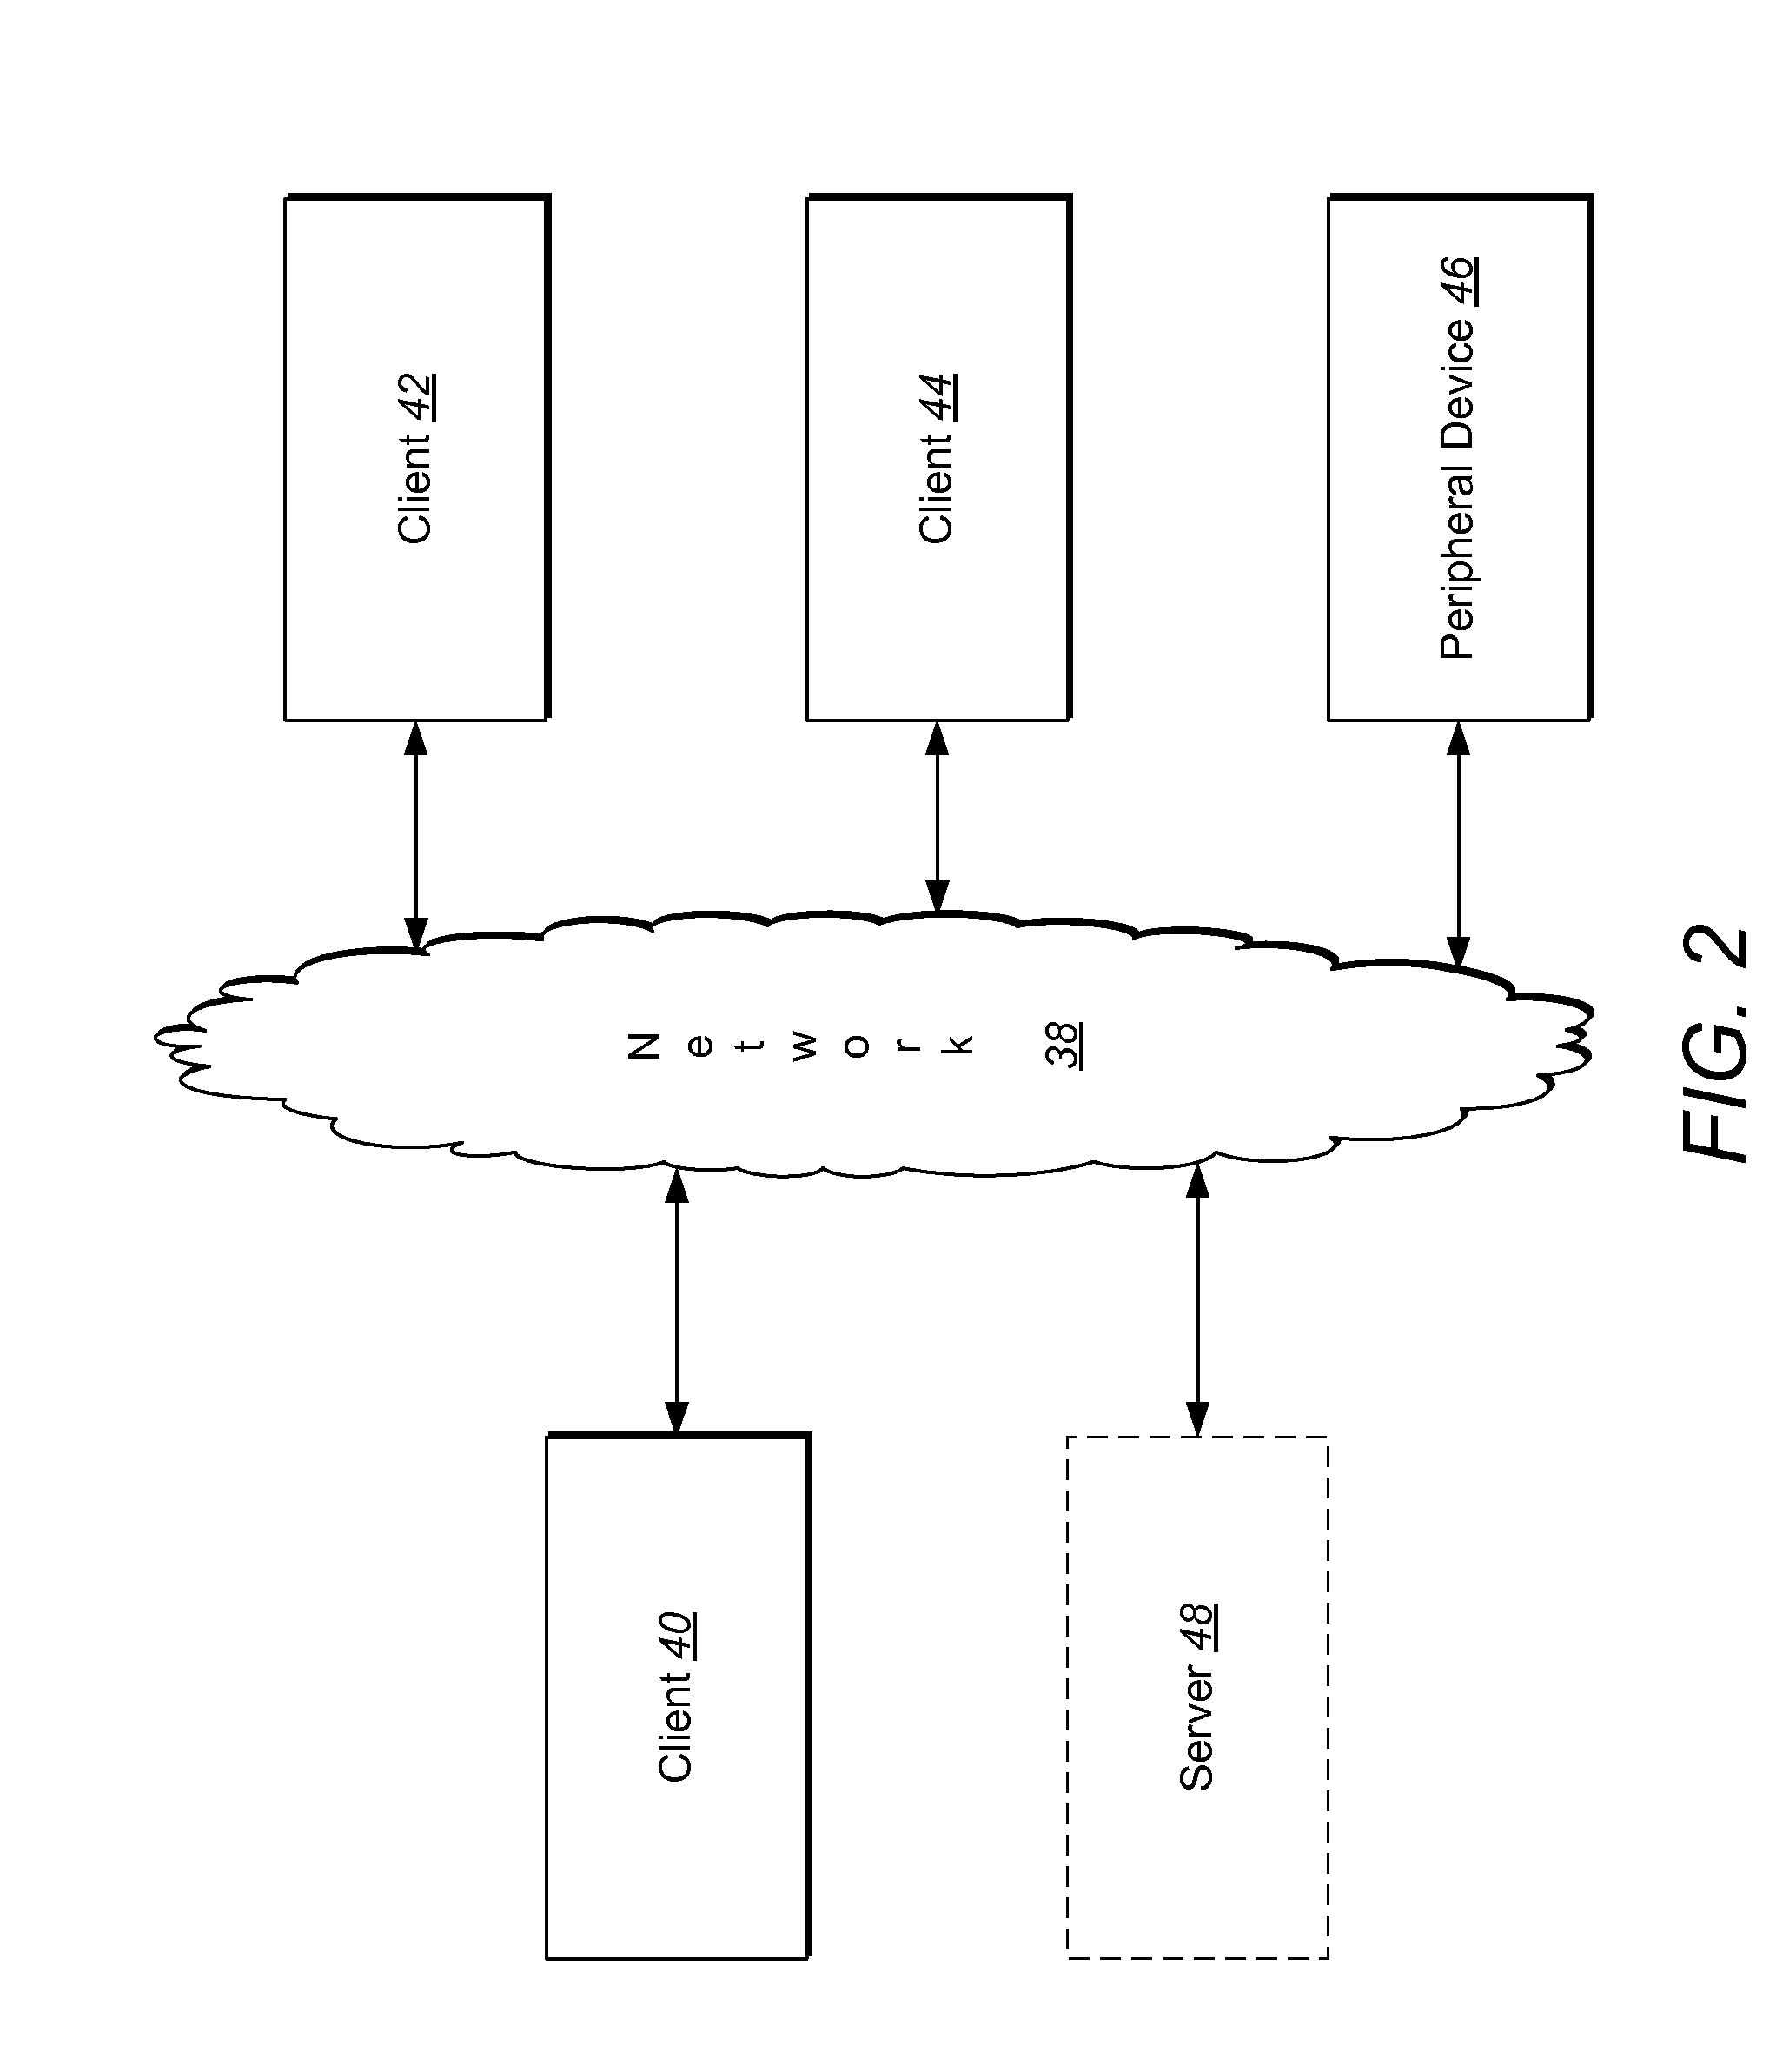 Systems and methods for updating a database for providing access to various files across a network